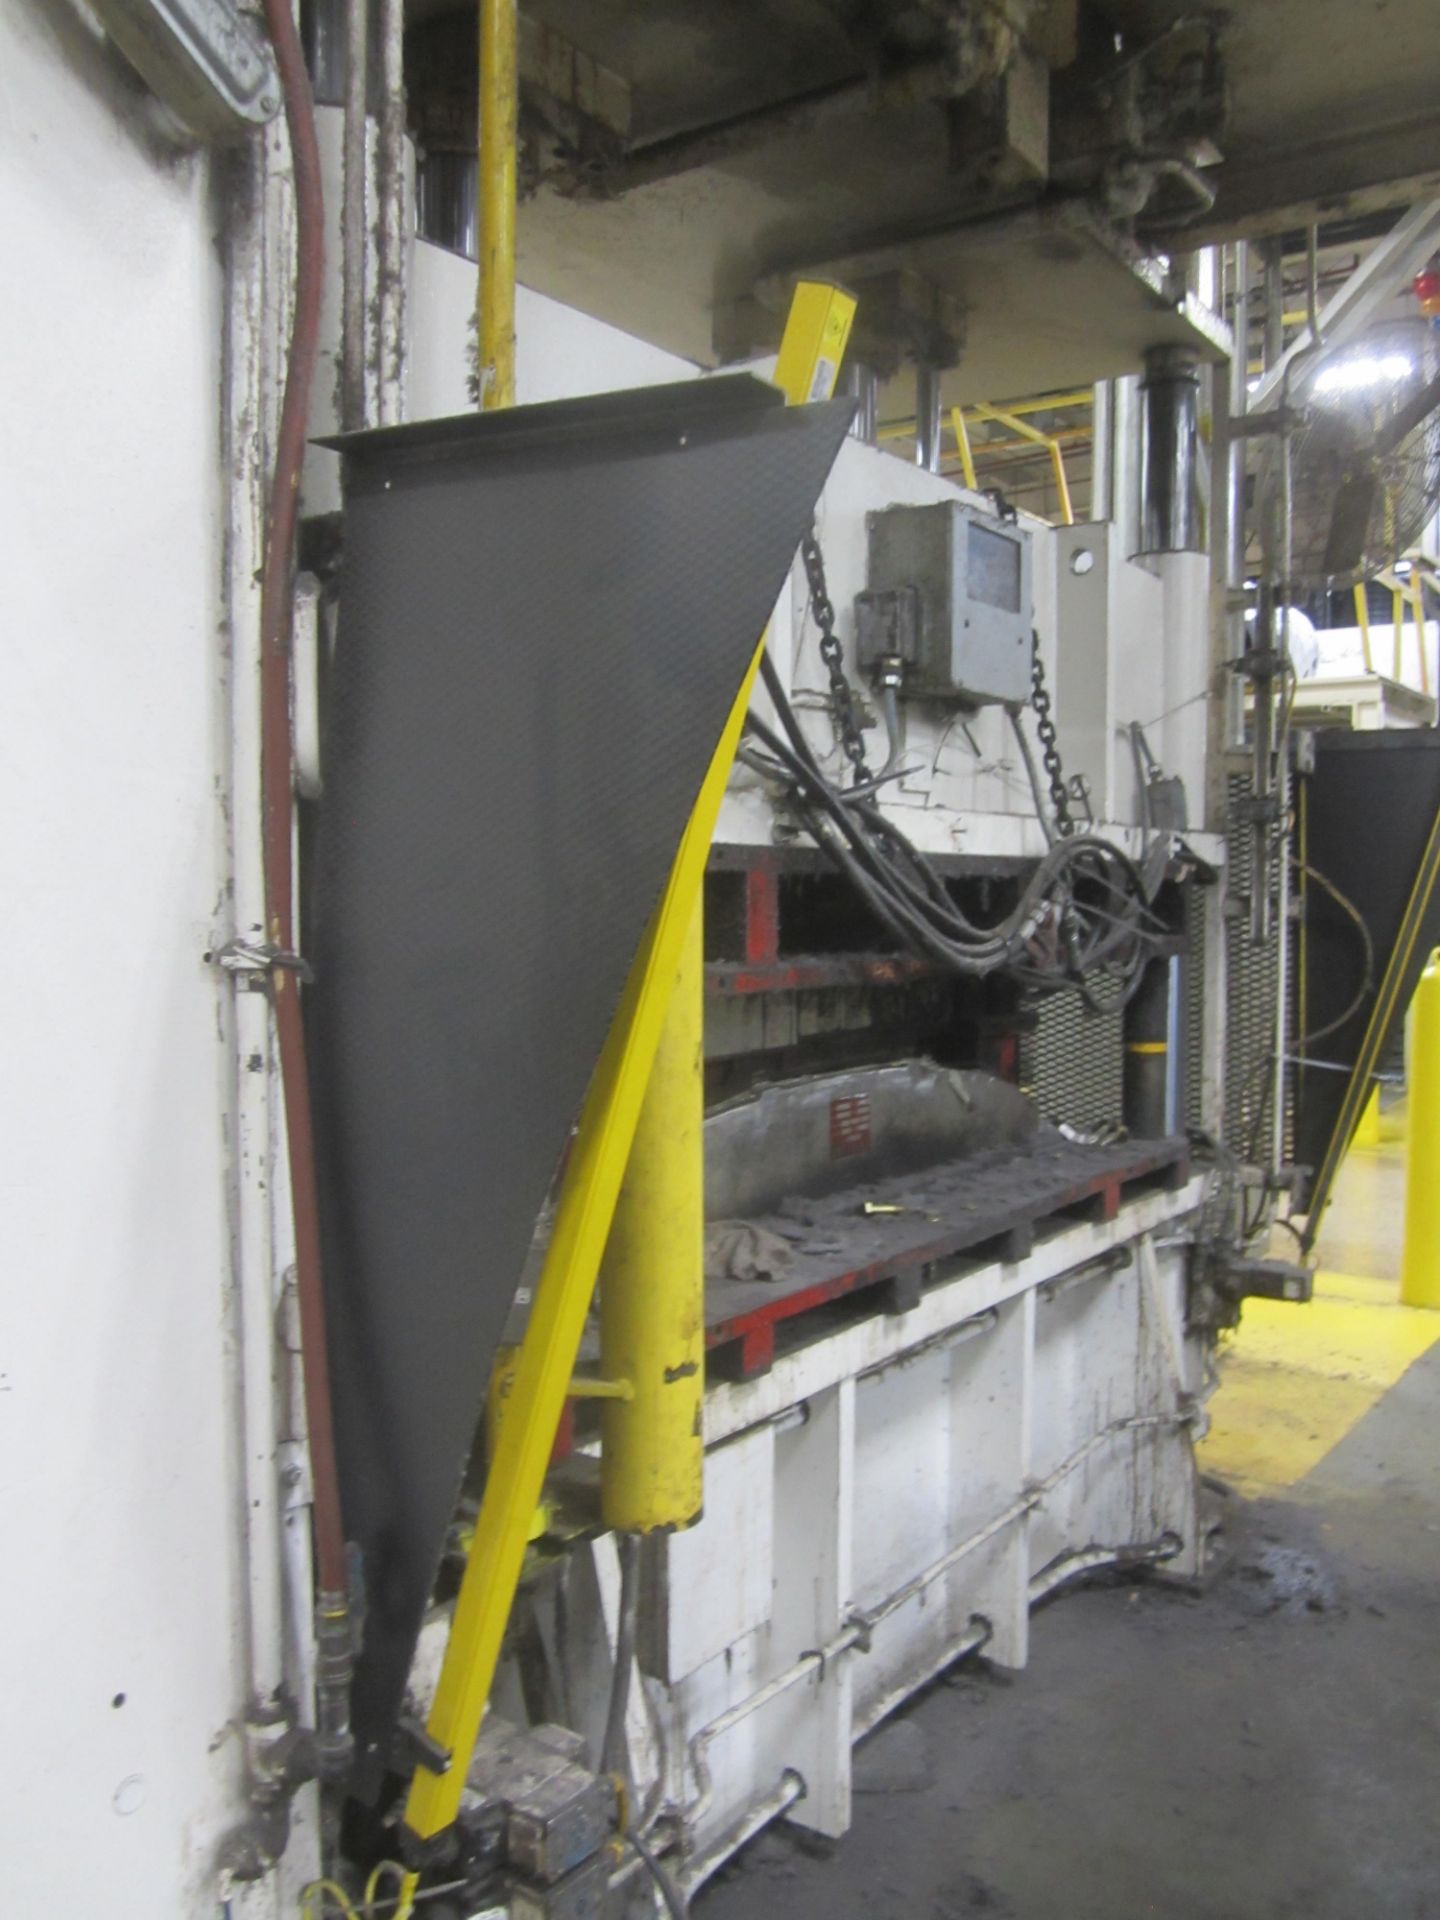 St. Lawrence 100 Ton Hydraulic Press, 4-Post, 114" X 50" Bed and Ram Area, 100" X 36" Between the - Image 5 of 9